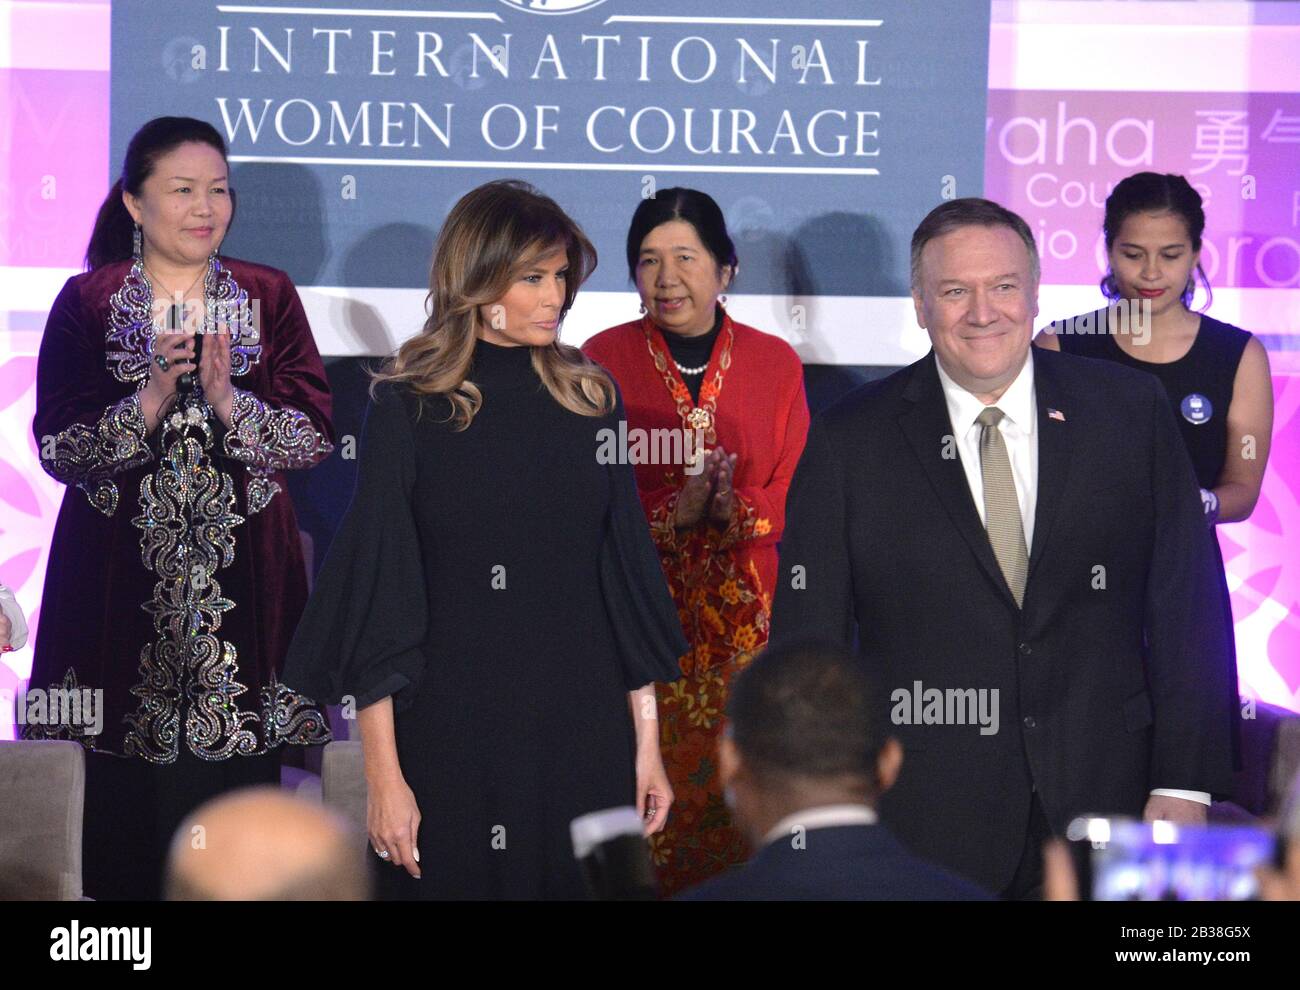 Washington, United States. 04th Mar, 2020. First Lady Melania Trump (2nd, L) and Secretary of State Mike Pompeo arrive to attend the International Women of Courage awards program with (L-R) Sayragul Sauytbay (China), Susanna Liew (Malaysia) and Amaya Coppens (Nicaragua), at the State Department, Wednesday, March 4, 2020, in Washington, DC. The award honors women of courage and leadership in social justice, human rights, gender equality and the advancement of women and girls. Photo by Mike Theiler/UPI Credit: UPI/Alamy Live News Stock Photo